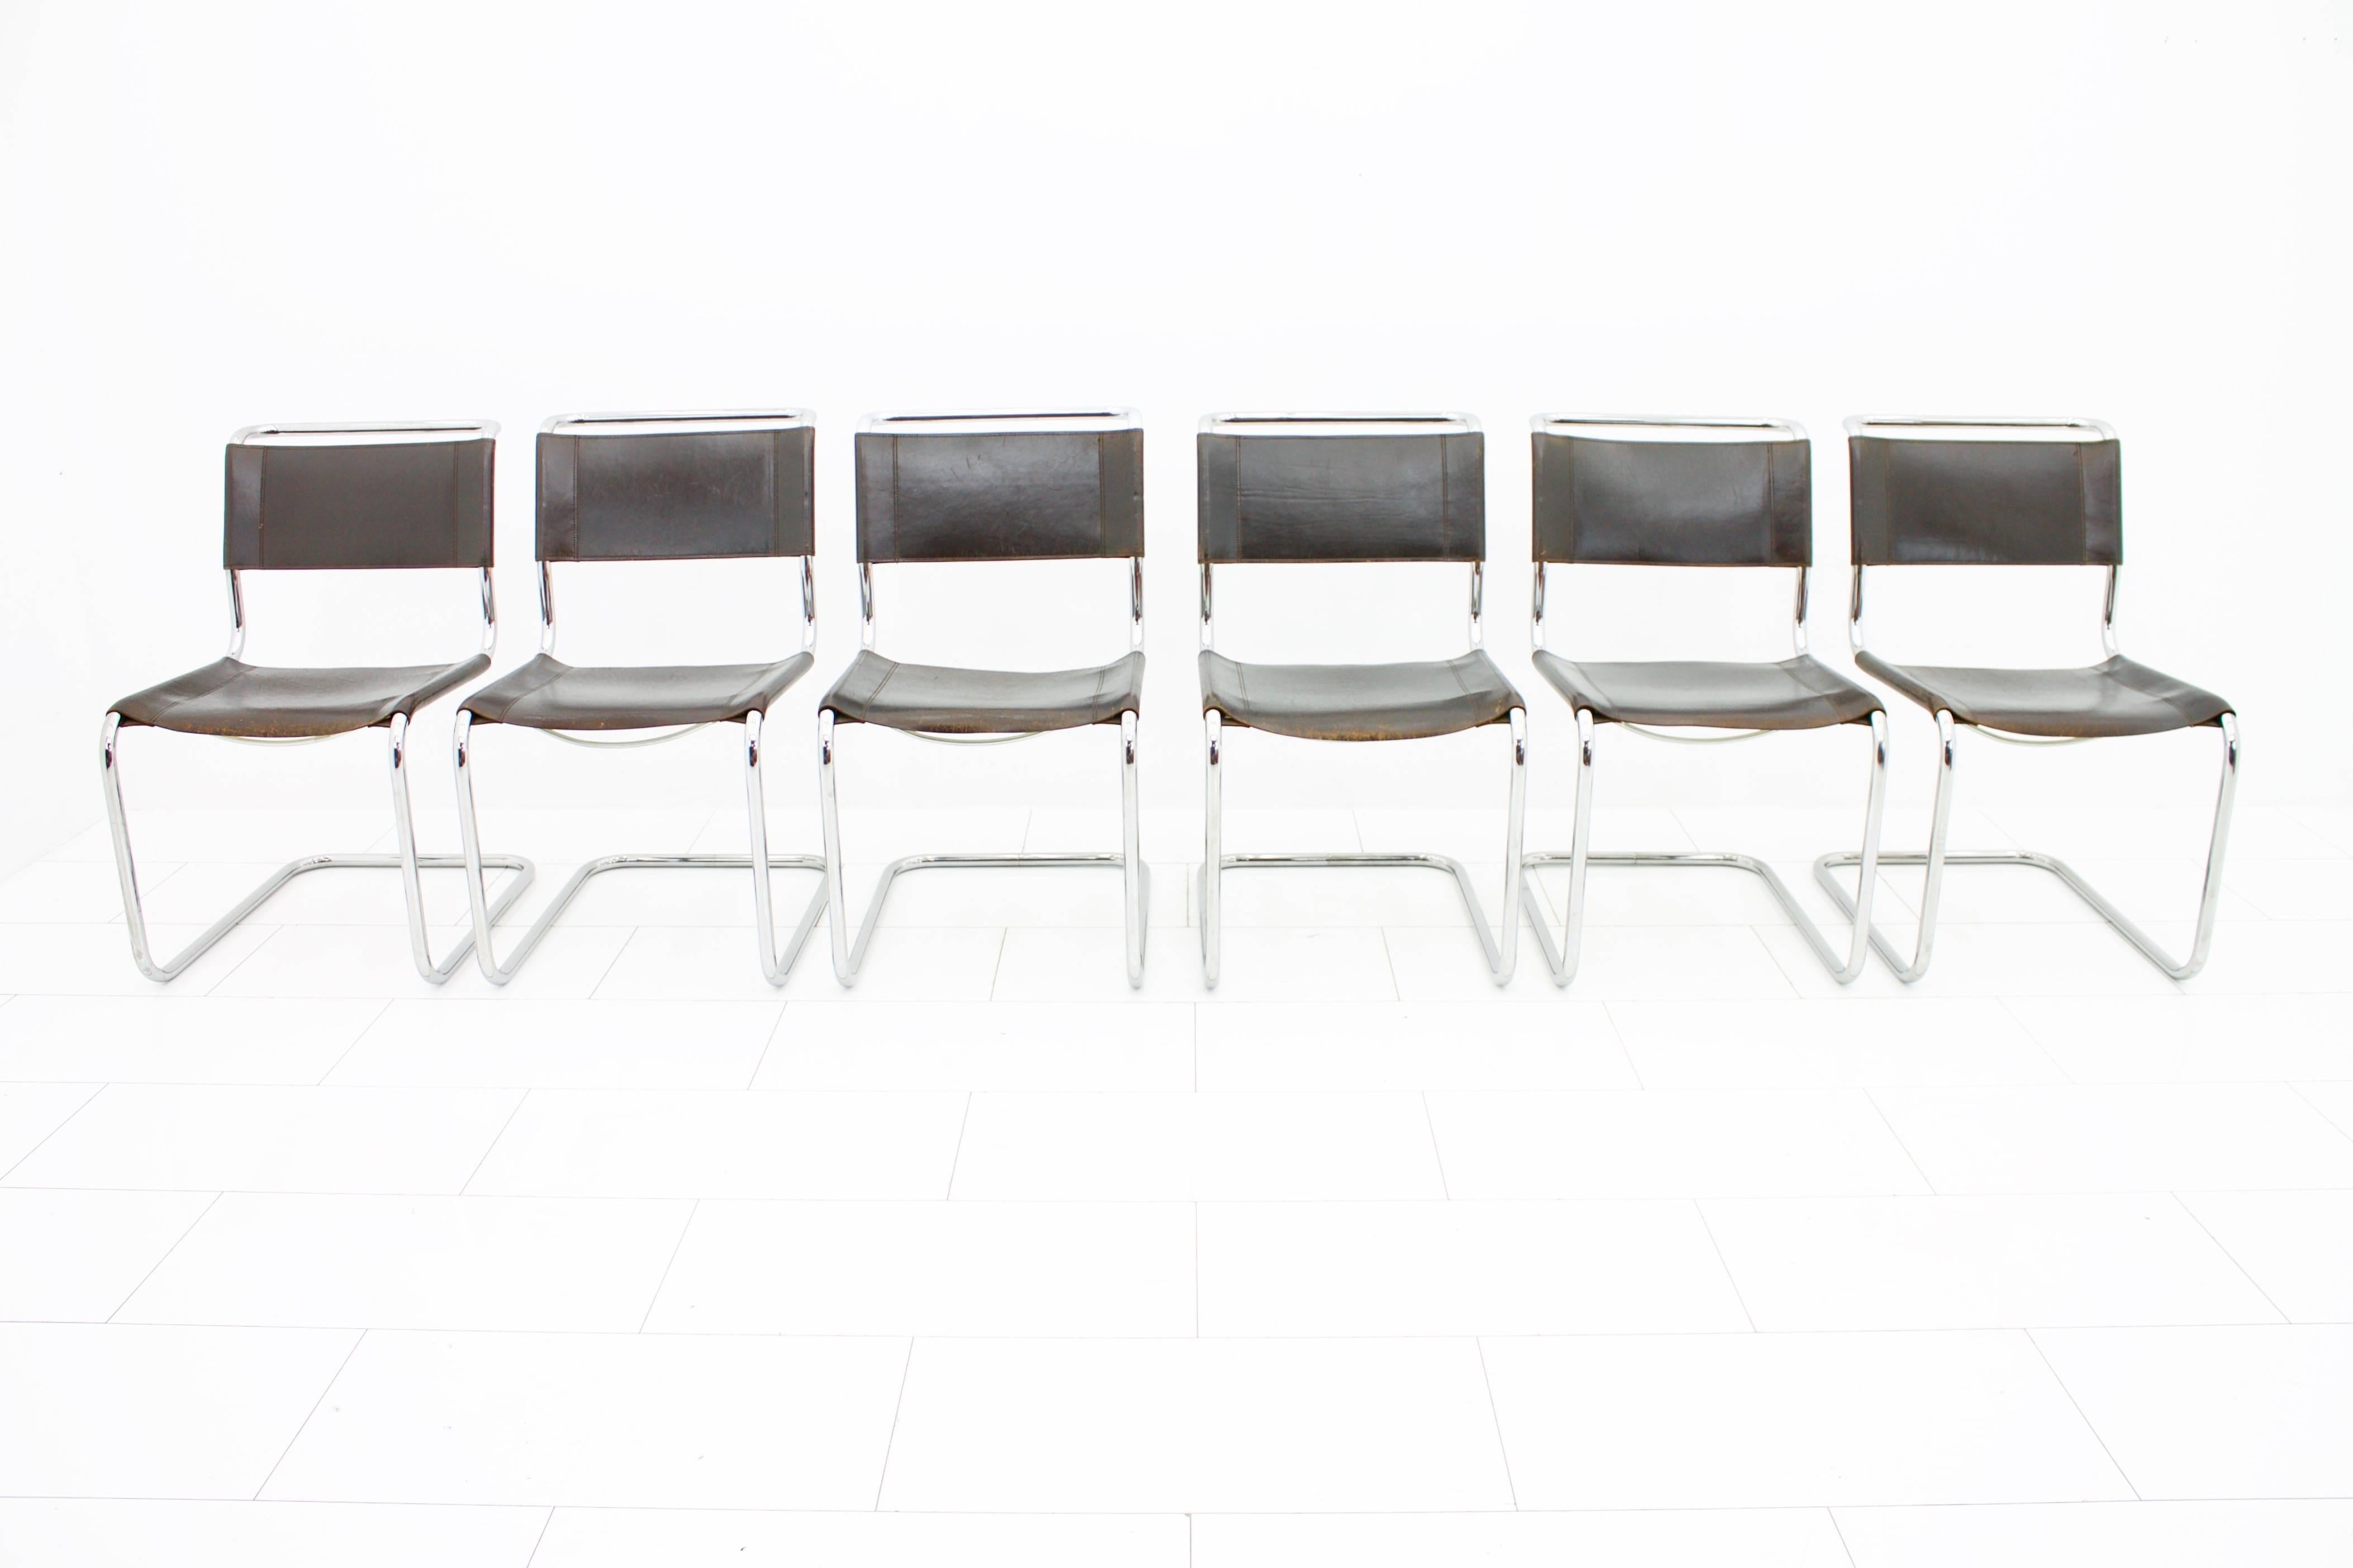 Set of six S33 steel tube chairs with dark brown leather by Mart Stam produced by Thonet. Every chair is marked with Thonet.
Measures: H 85 cm, W 50 cm, D 65 cm.
Very good condition with nice patina.
Worldwide shipping.